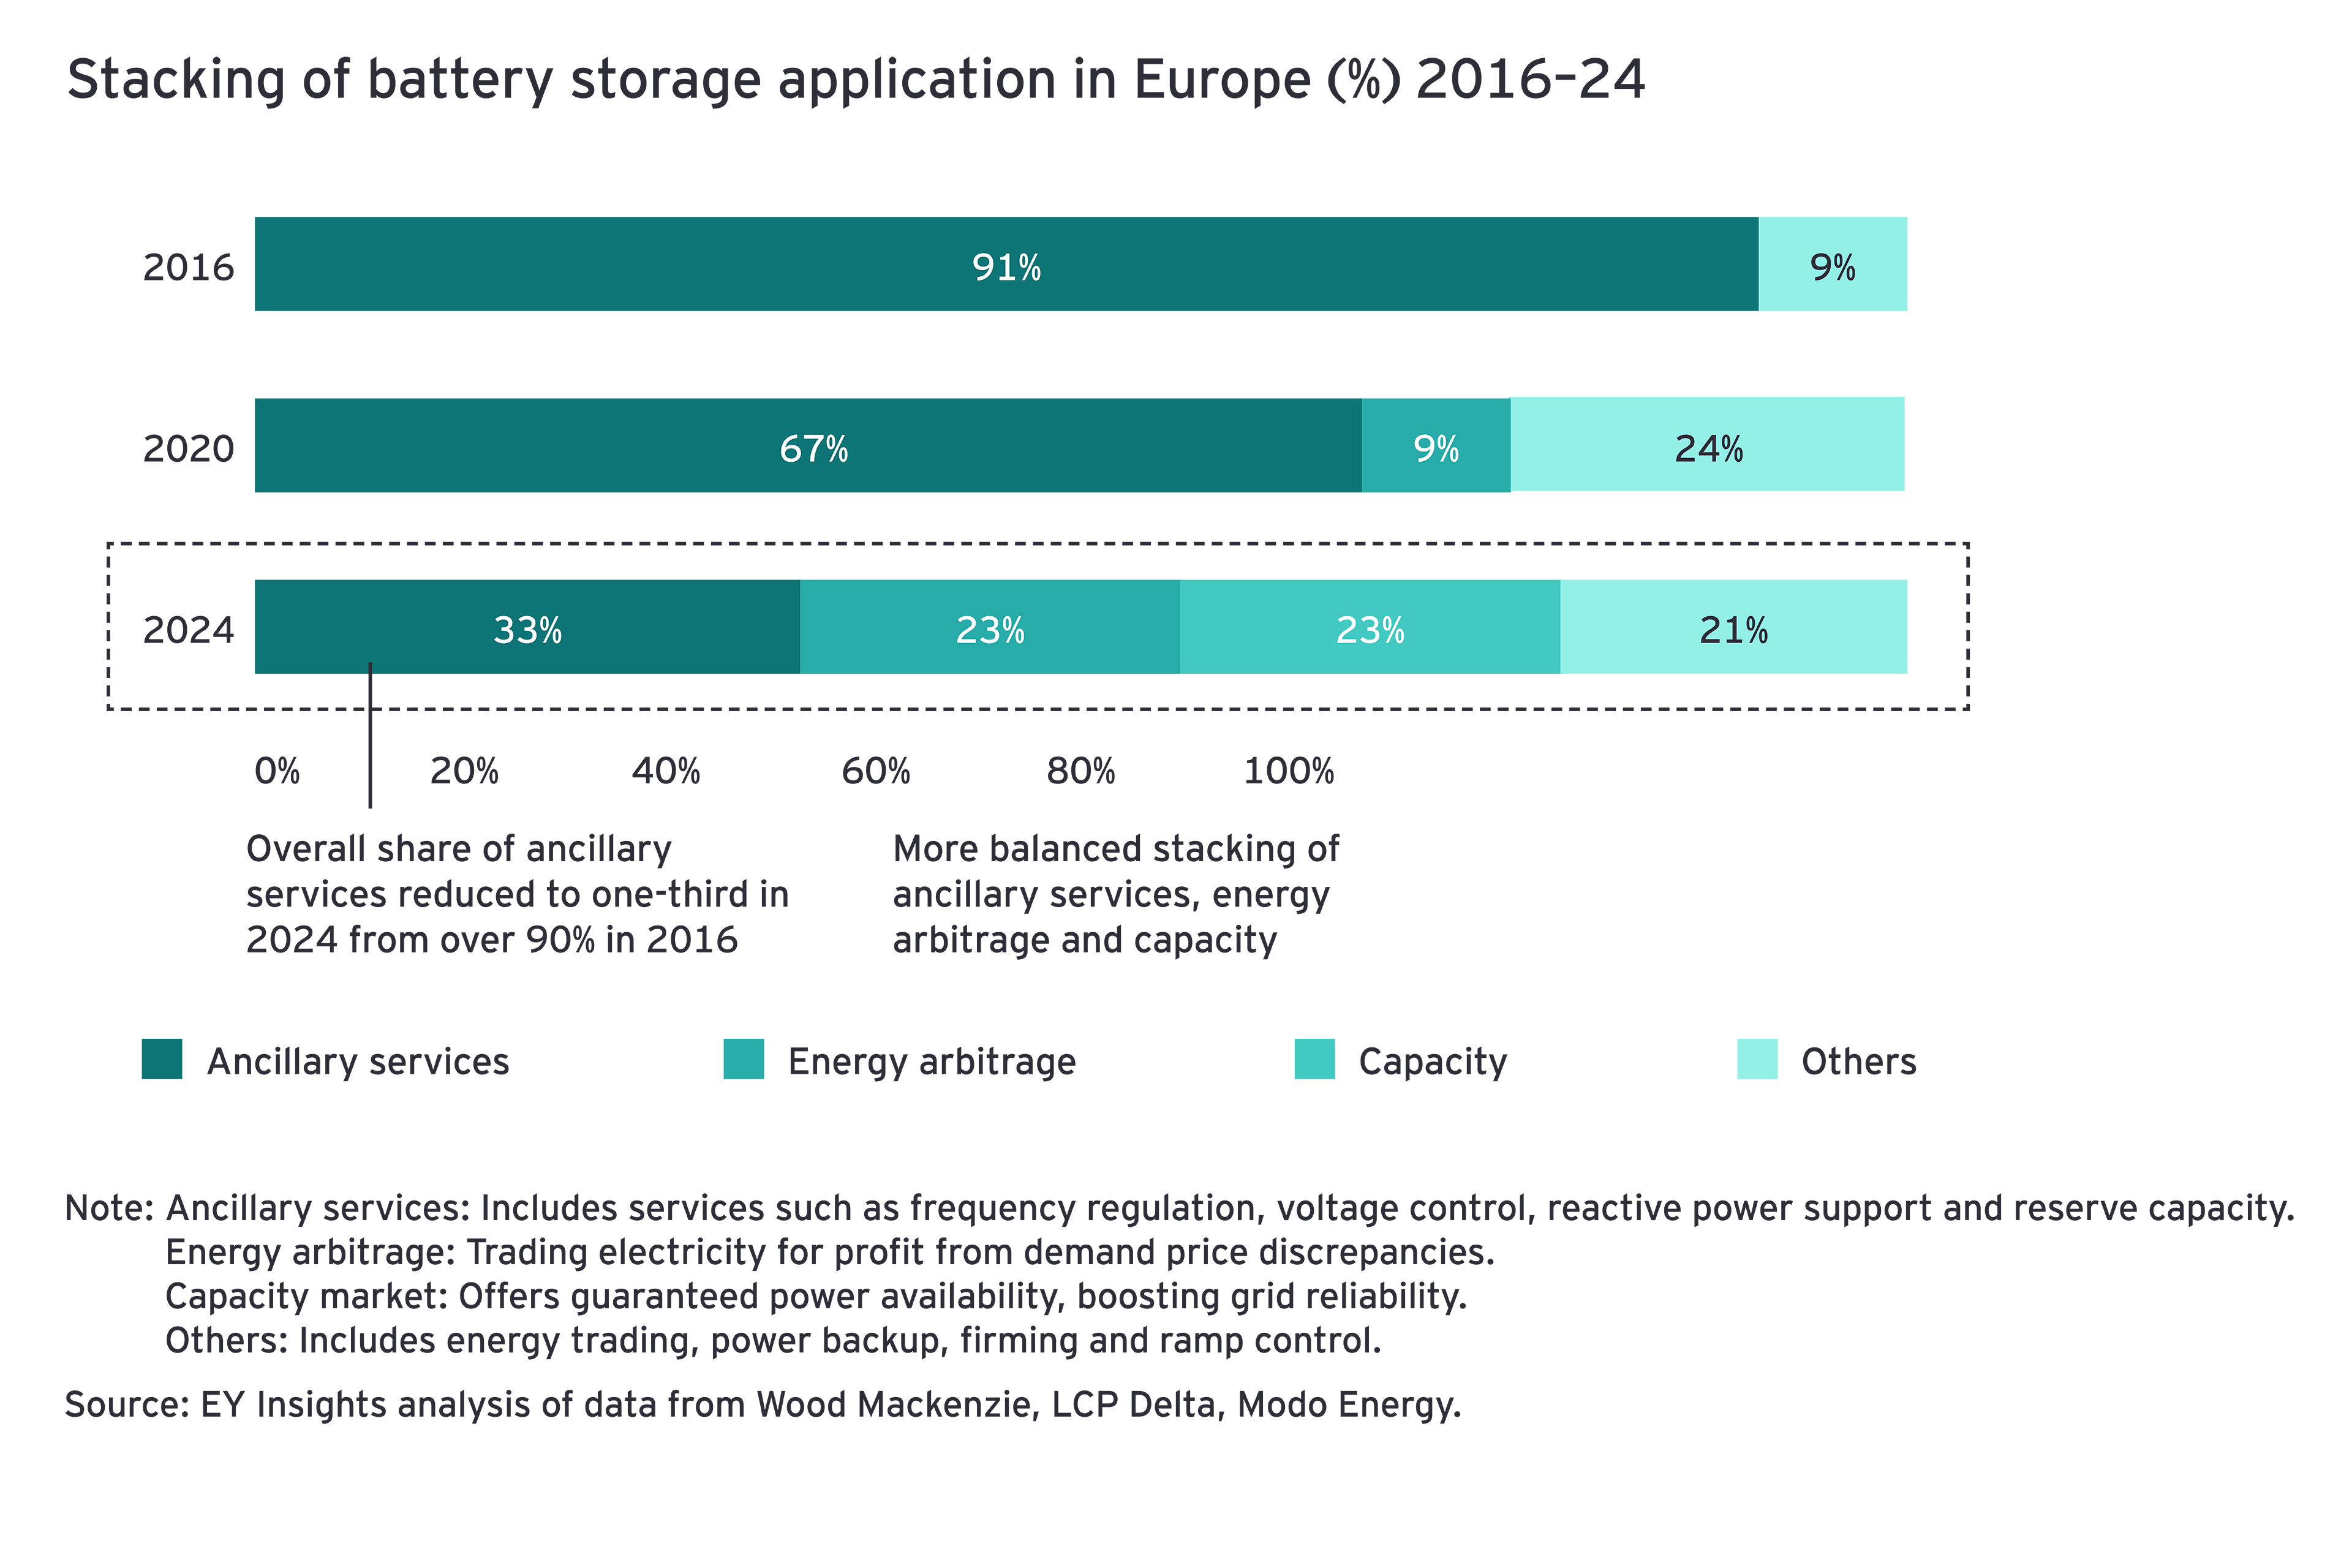 Stacking of battery storage application in Europe (%) 2016-2024